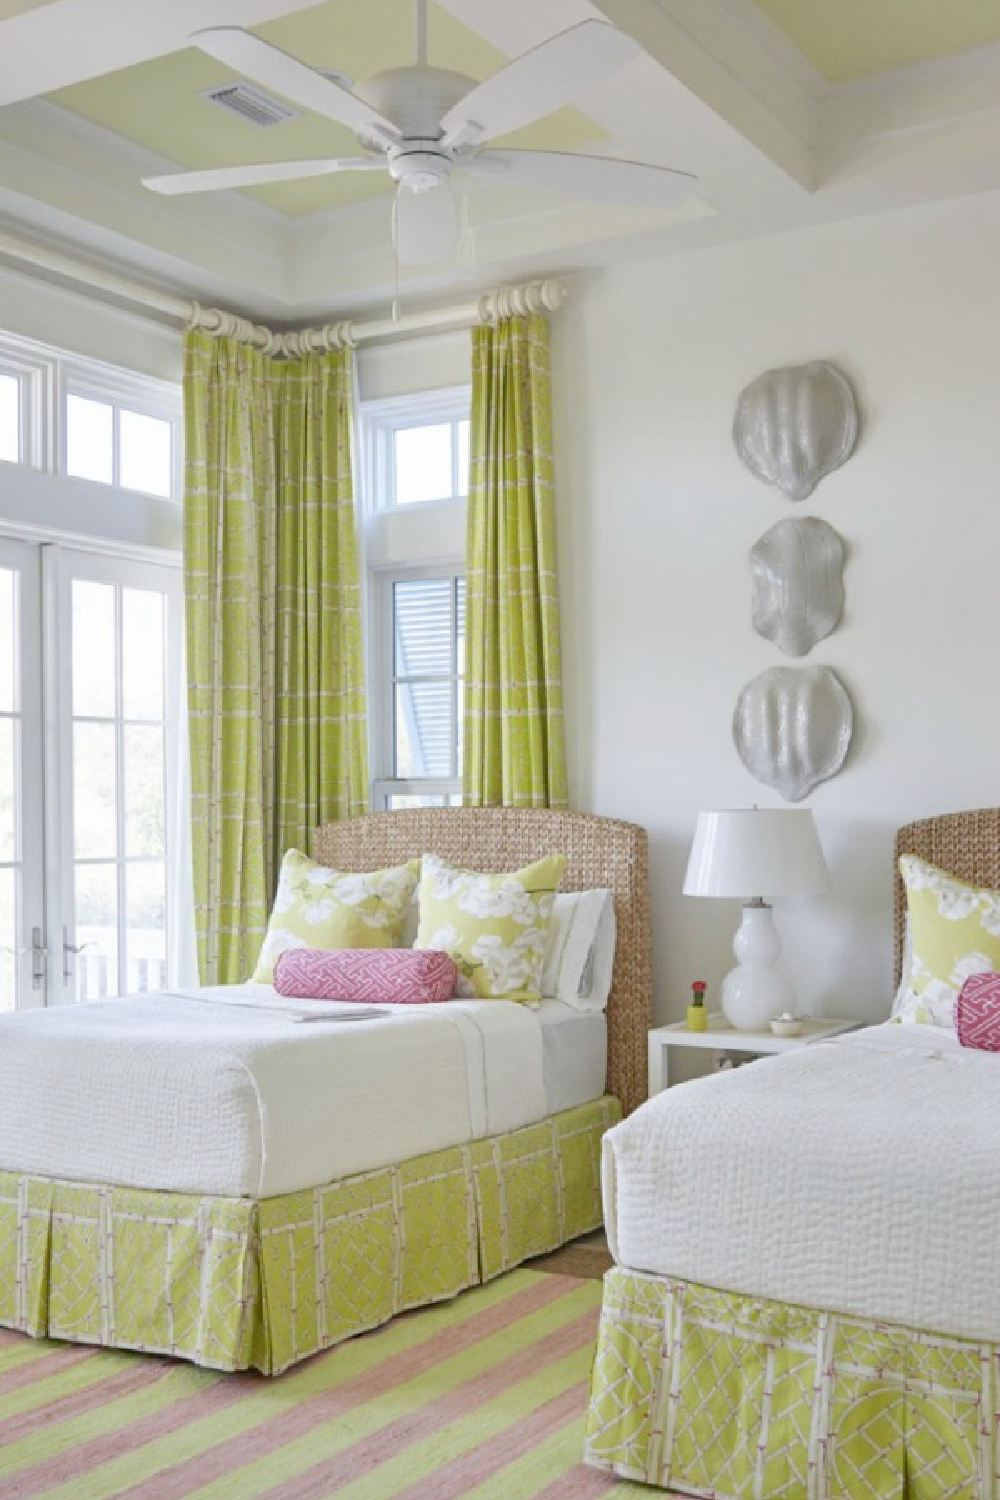 Chartreuse accents in a luxurious coastal bedroom with architecture by Geoff Chick.